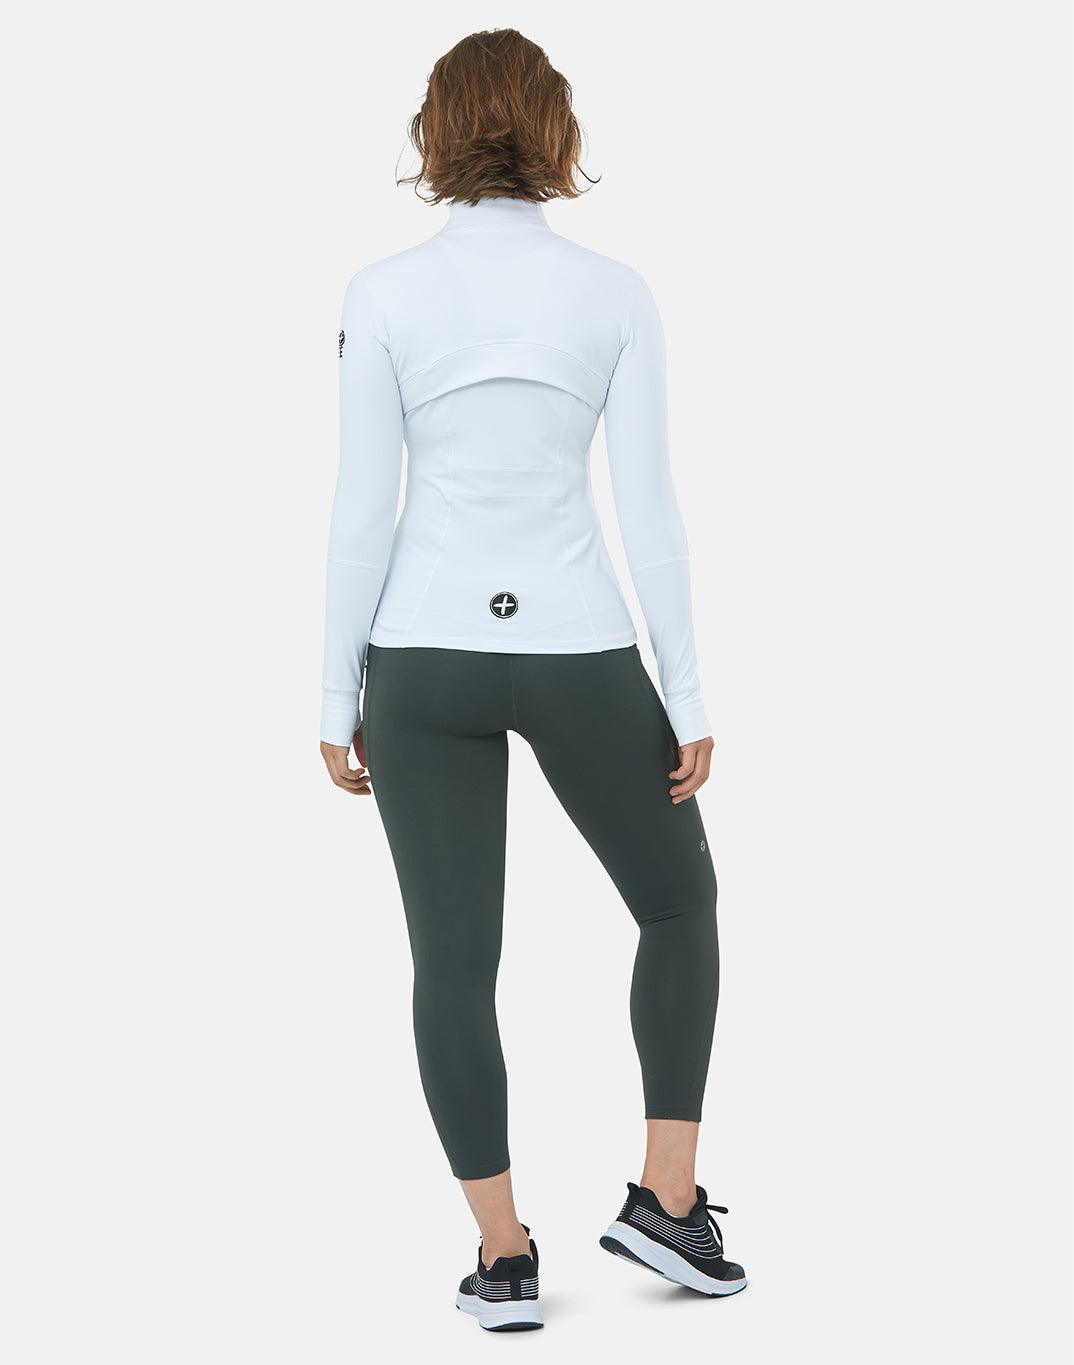 Upside Zip 2.0 in White - Mid Layer - Gym+Coffee IE